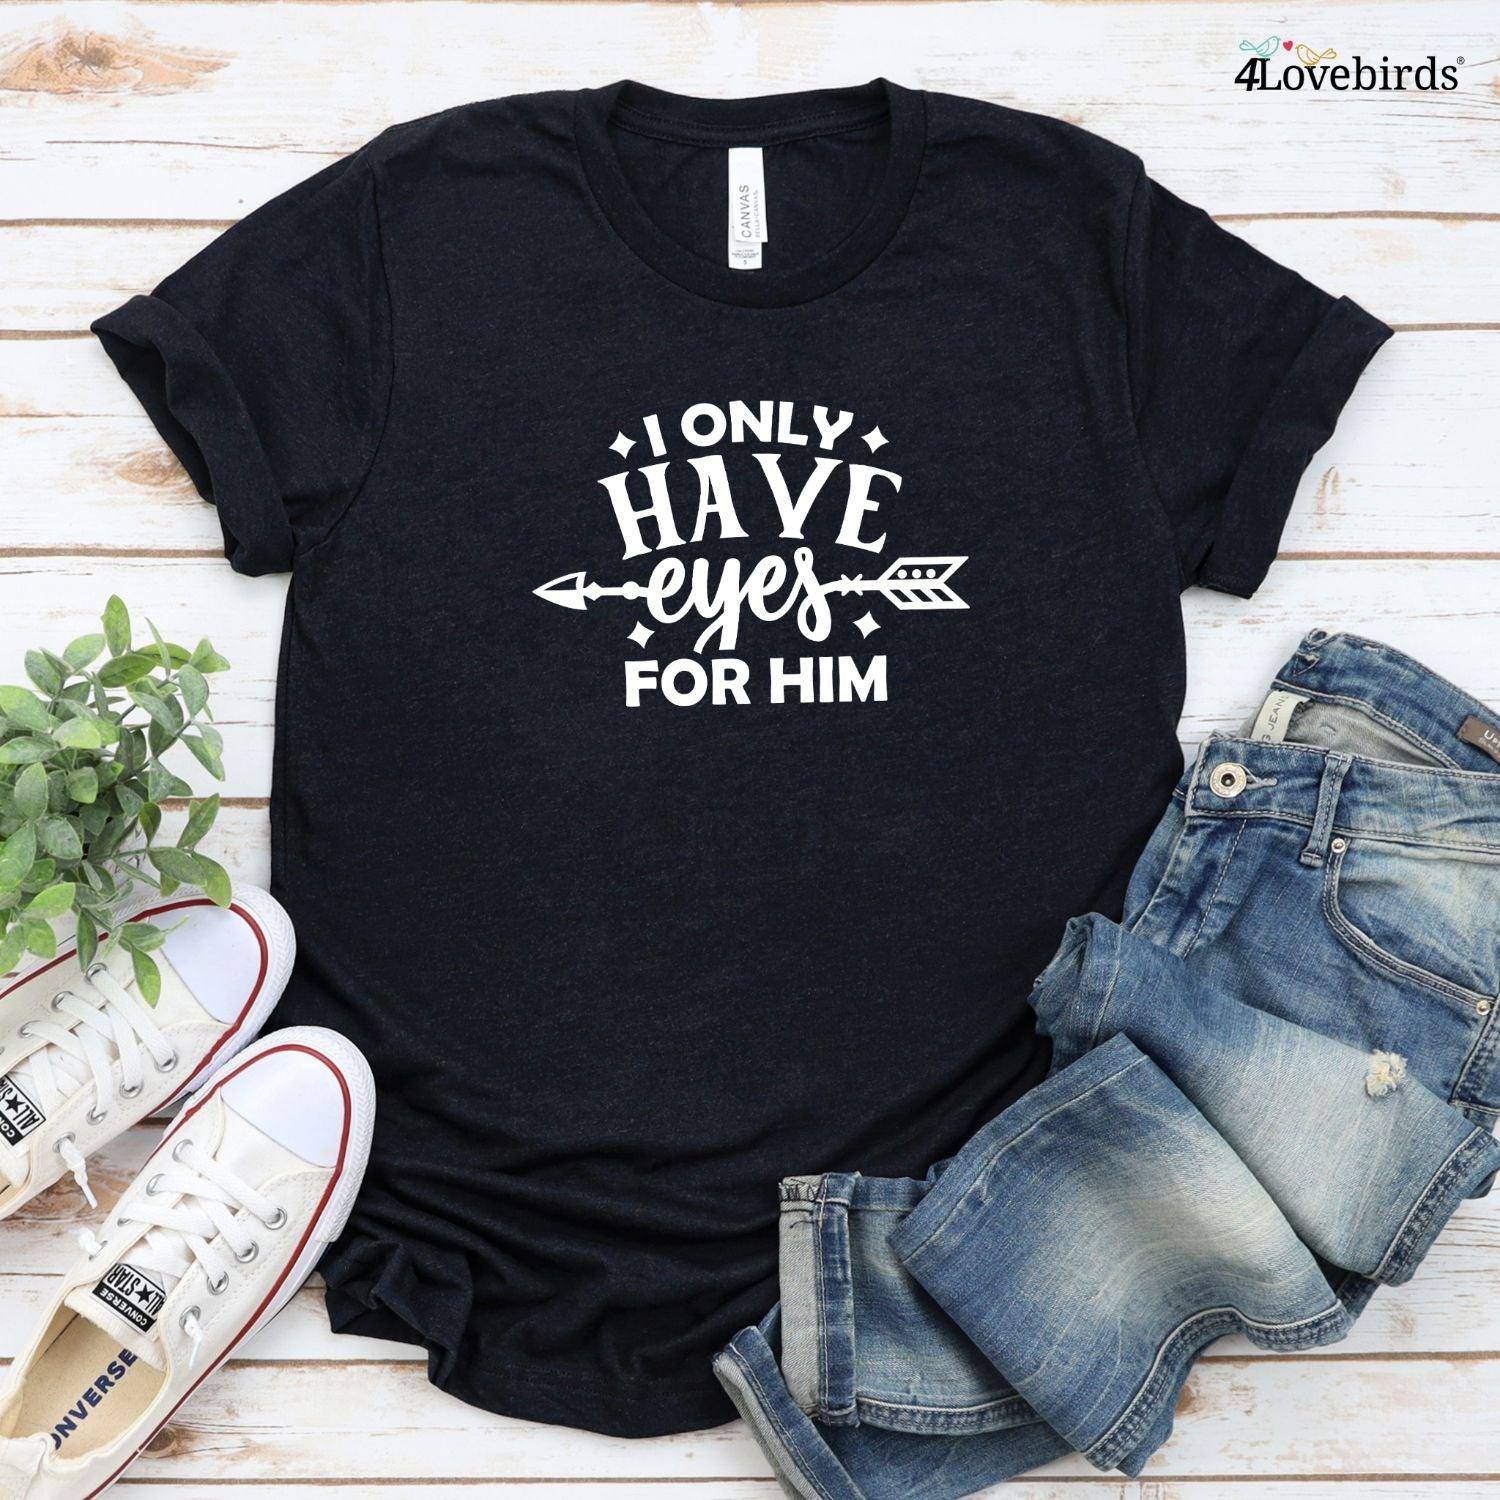 I Only Have Eyes For Him/Her Adorable Matching Sets - Couples Gifts - 4Lovebirds